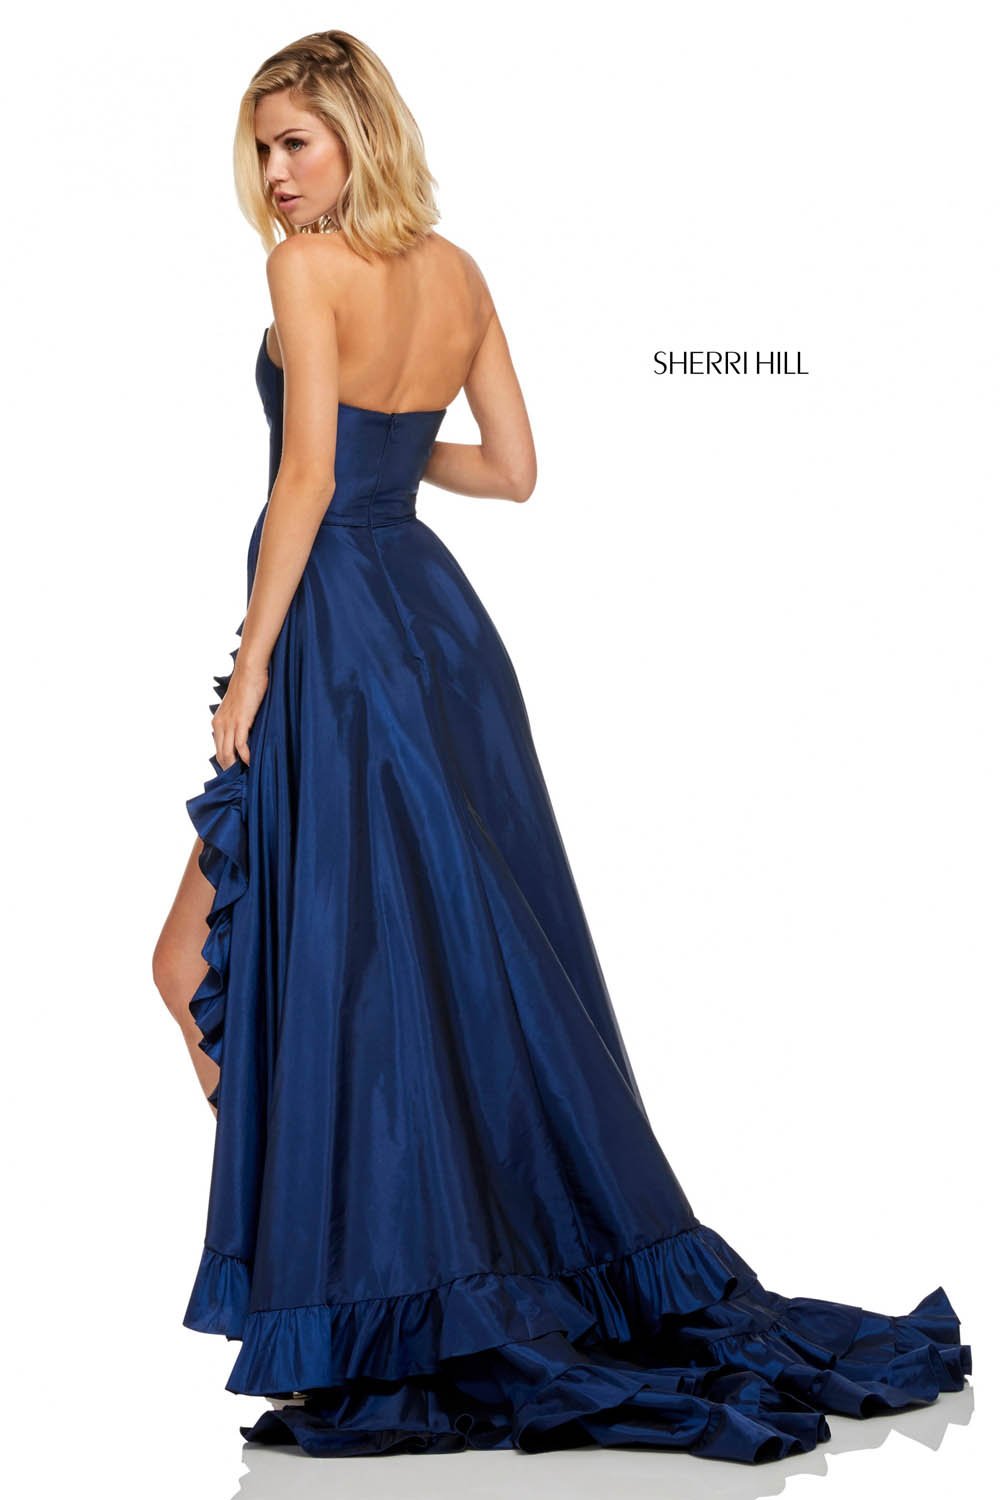 Sherri Hill 52605 dress images in these colors: Navy, Light Blue, Emerald, Ivory, Red, Candy Pink, Black, Yellow.